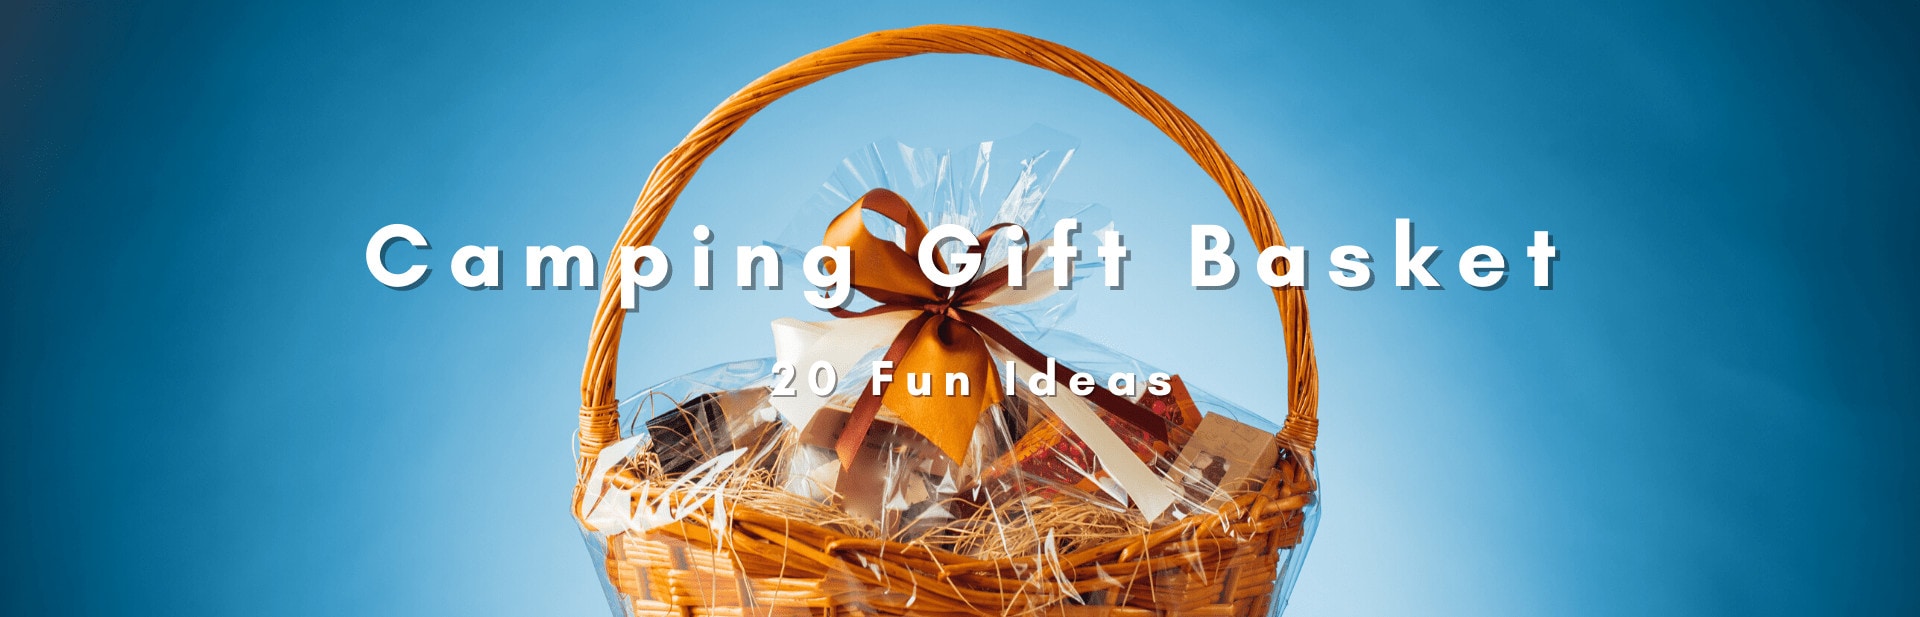 20 Camping Gift Basket Ideas To Surprise Your Favorite Camper